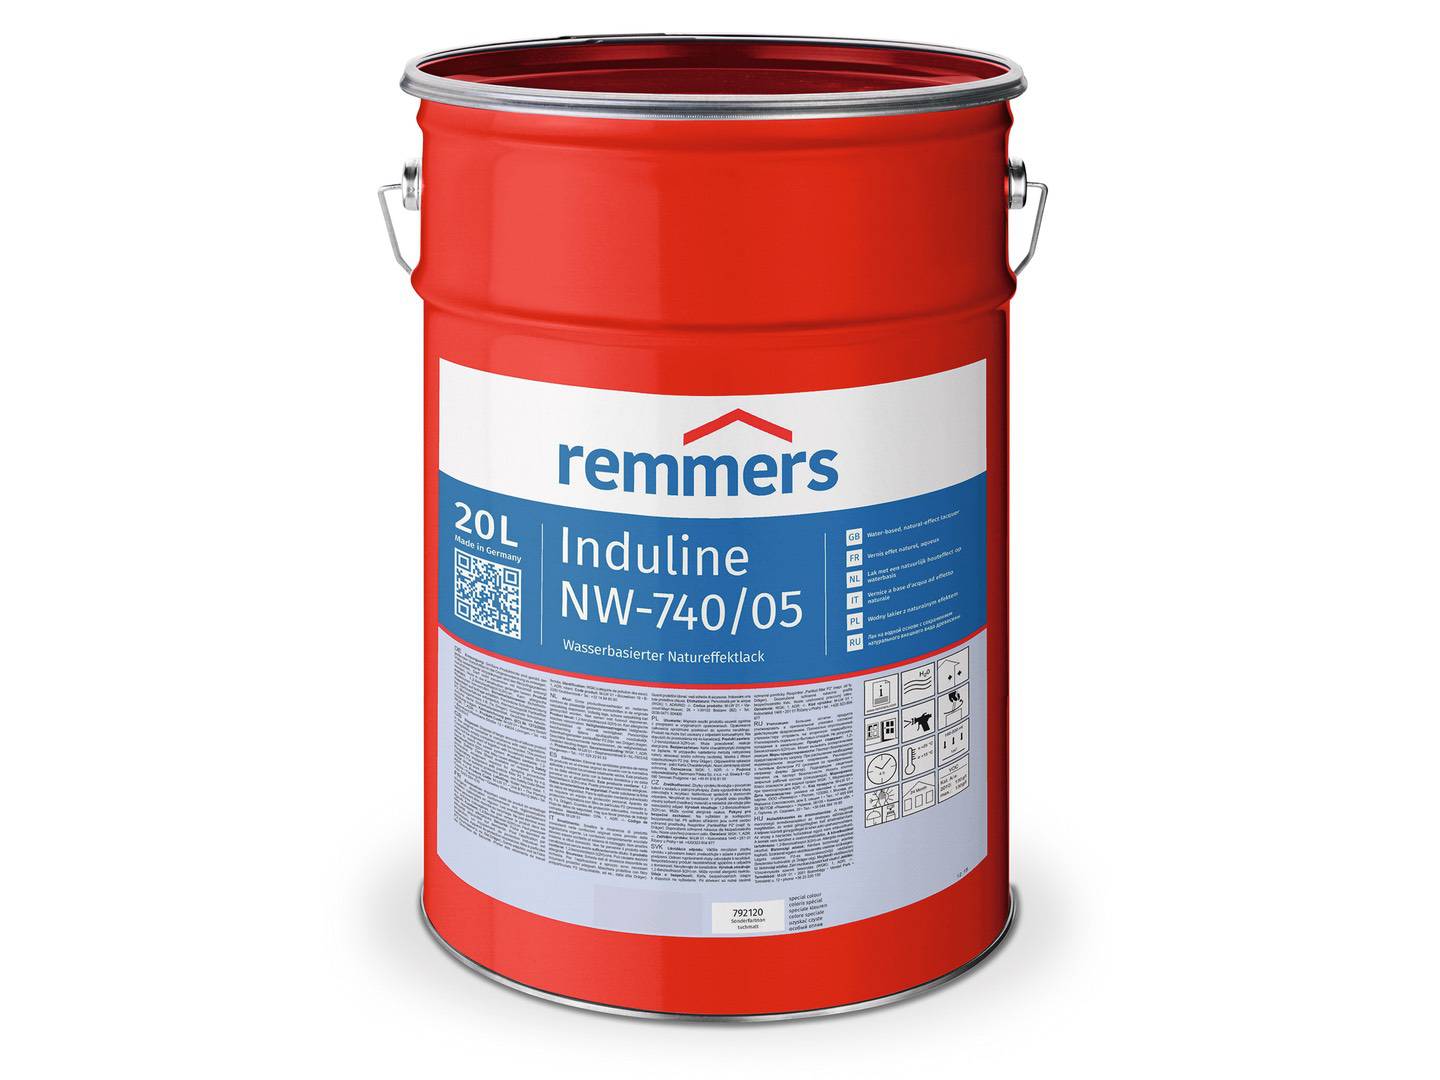 REMMERS Induline NW-740/05 farblos 5 l